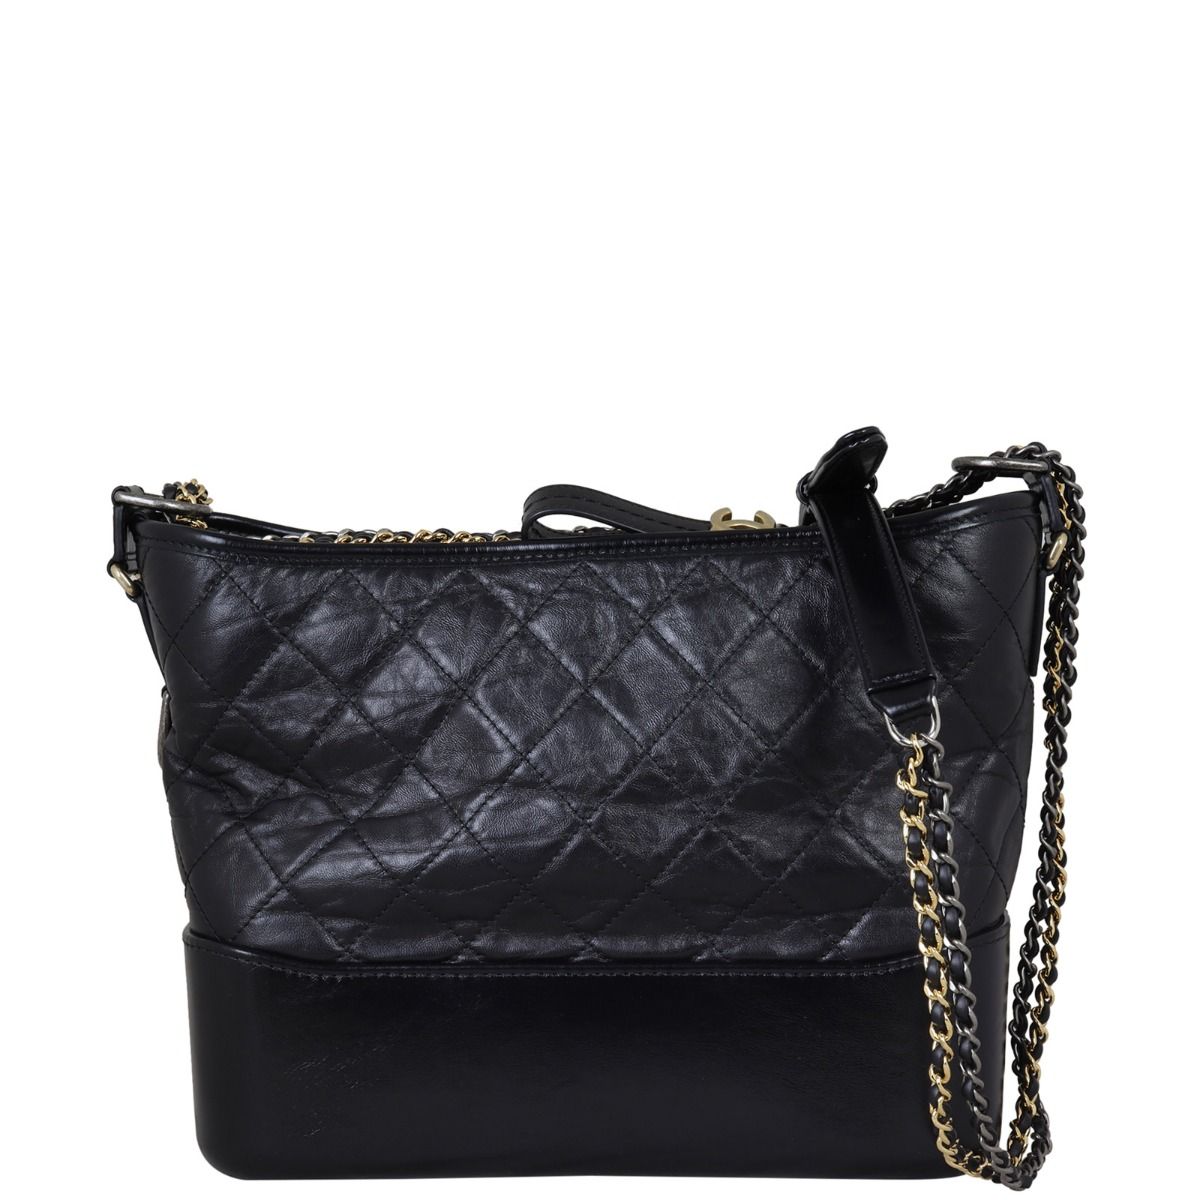 CHANEL GABRIELLE BAG BY CHANEL HOBO Black Patent leather ref